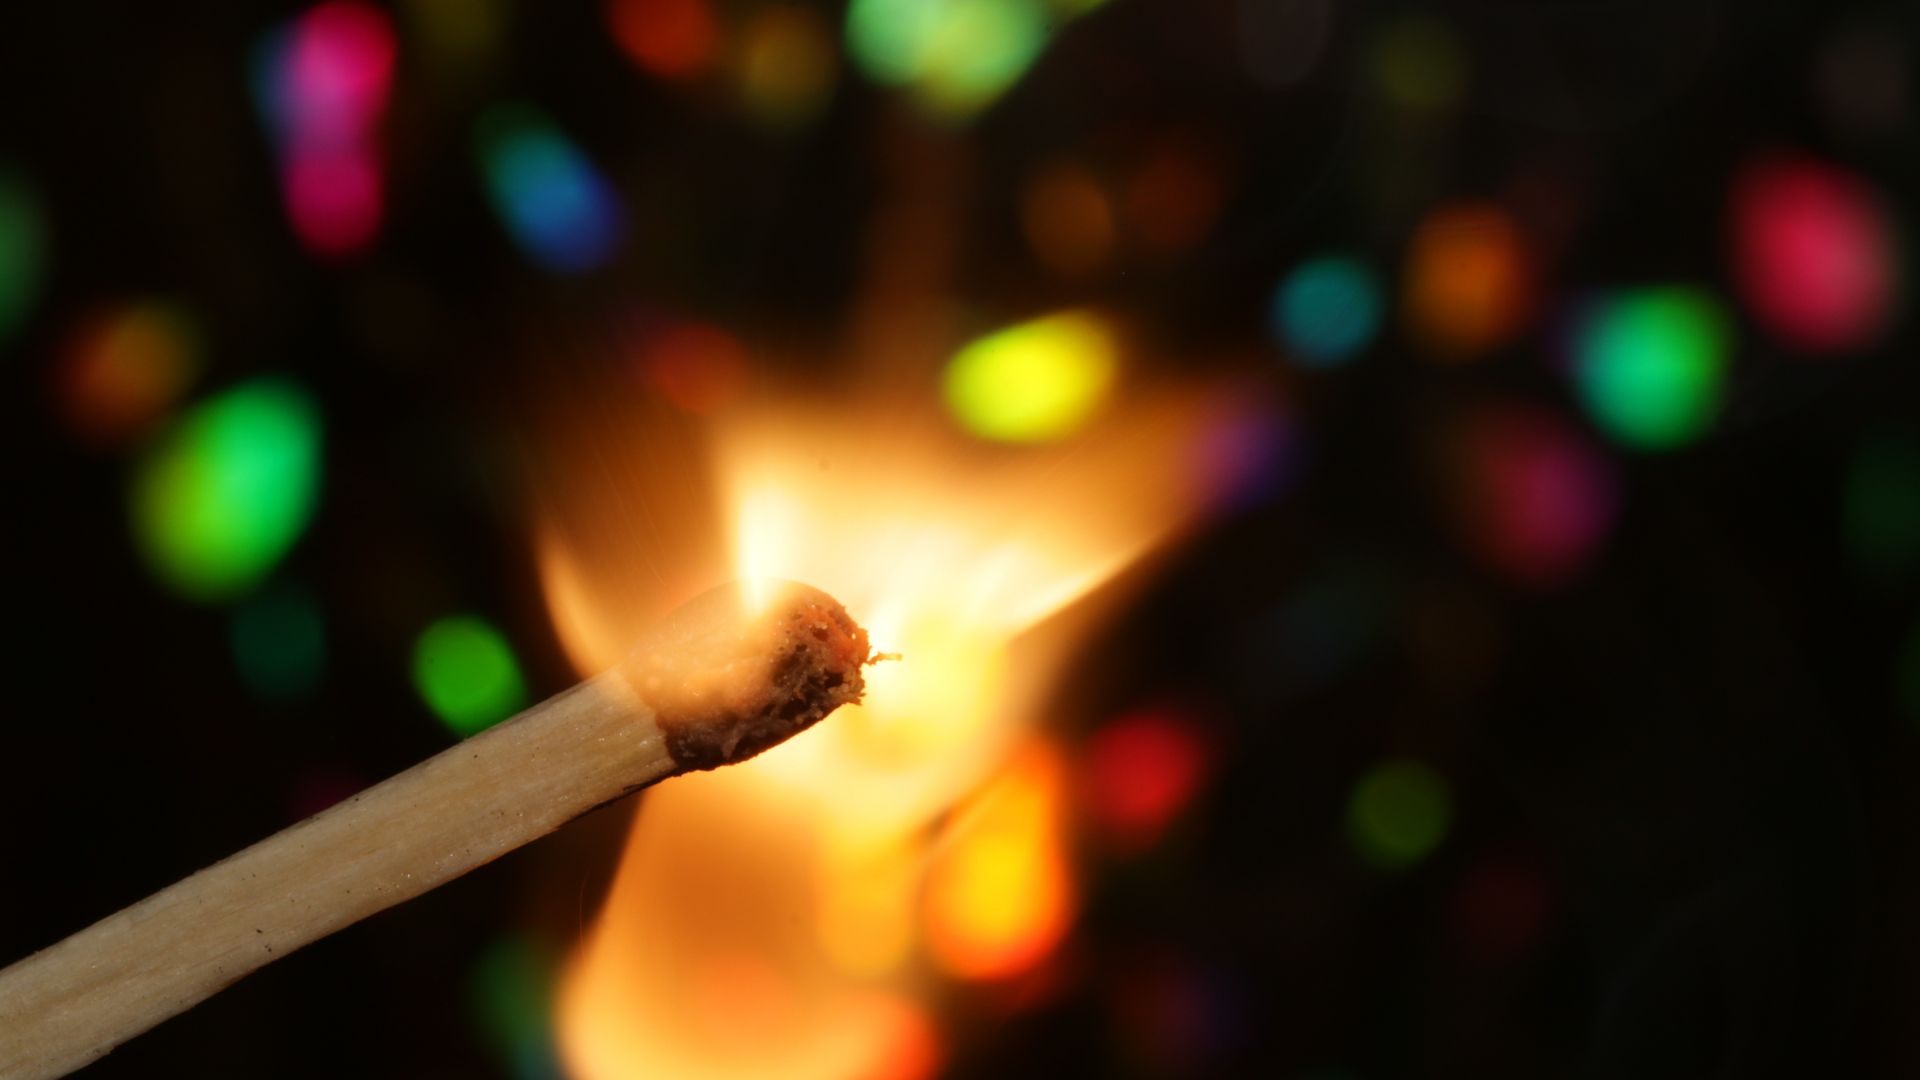 Wallpaper Matchstick on fire, colorful